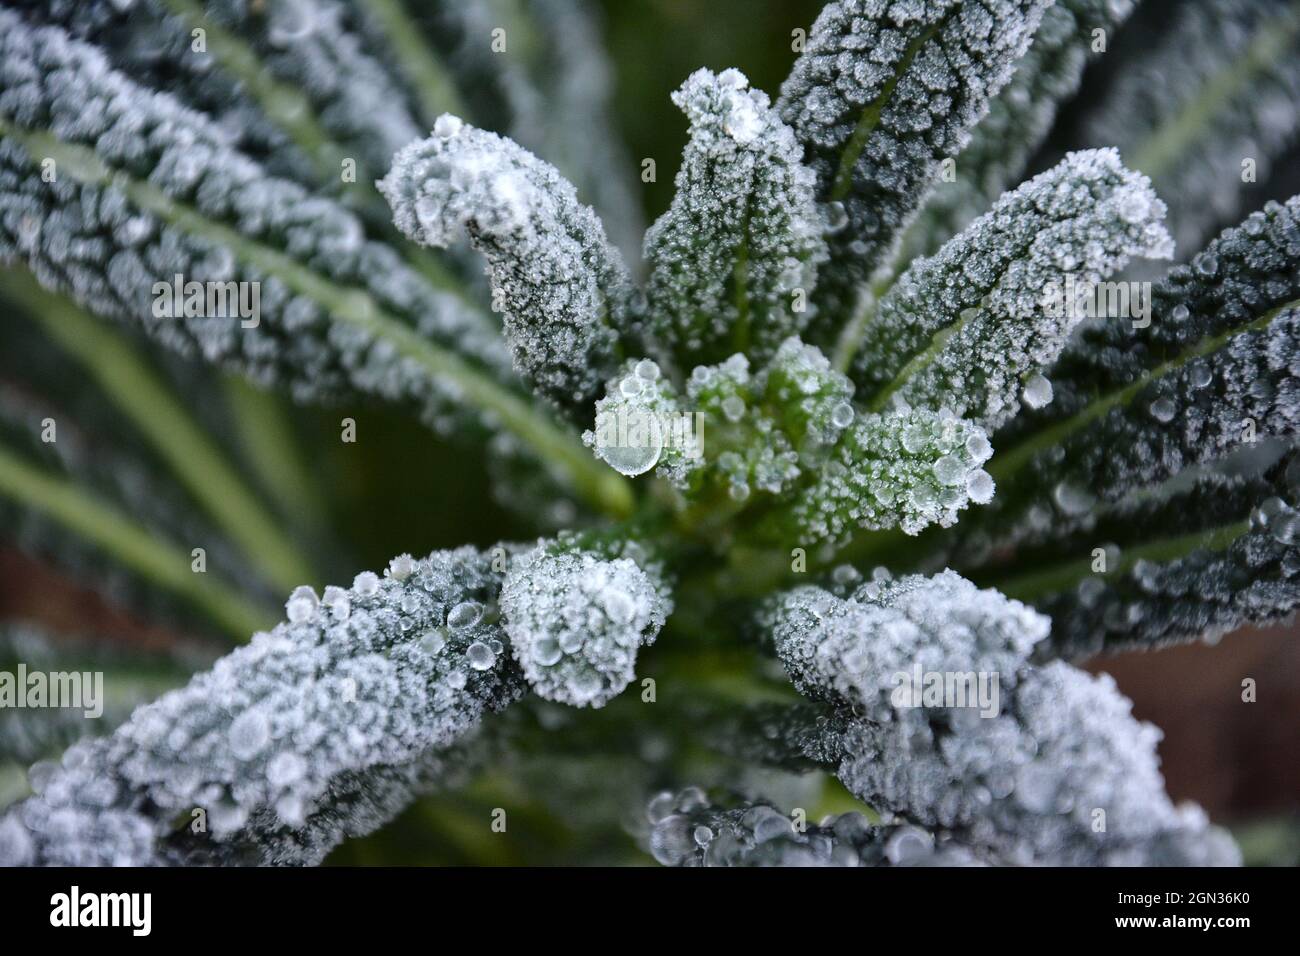 Selective focus shot of Nero di Toscana kale growing in winter frost Stock Photo